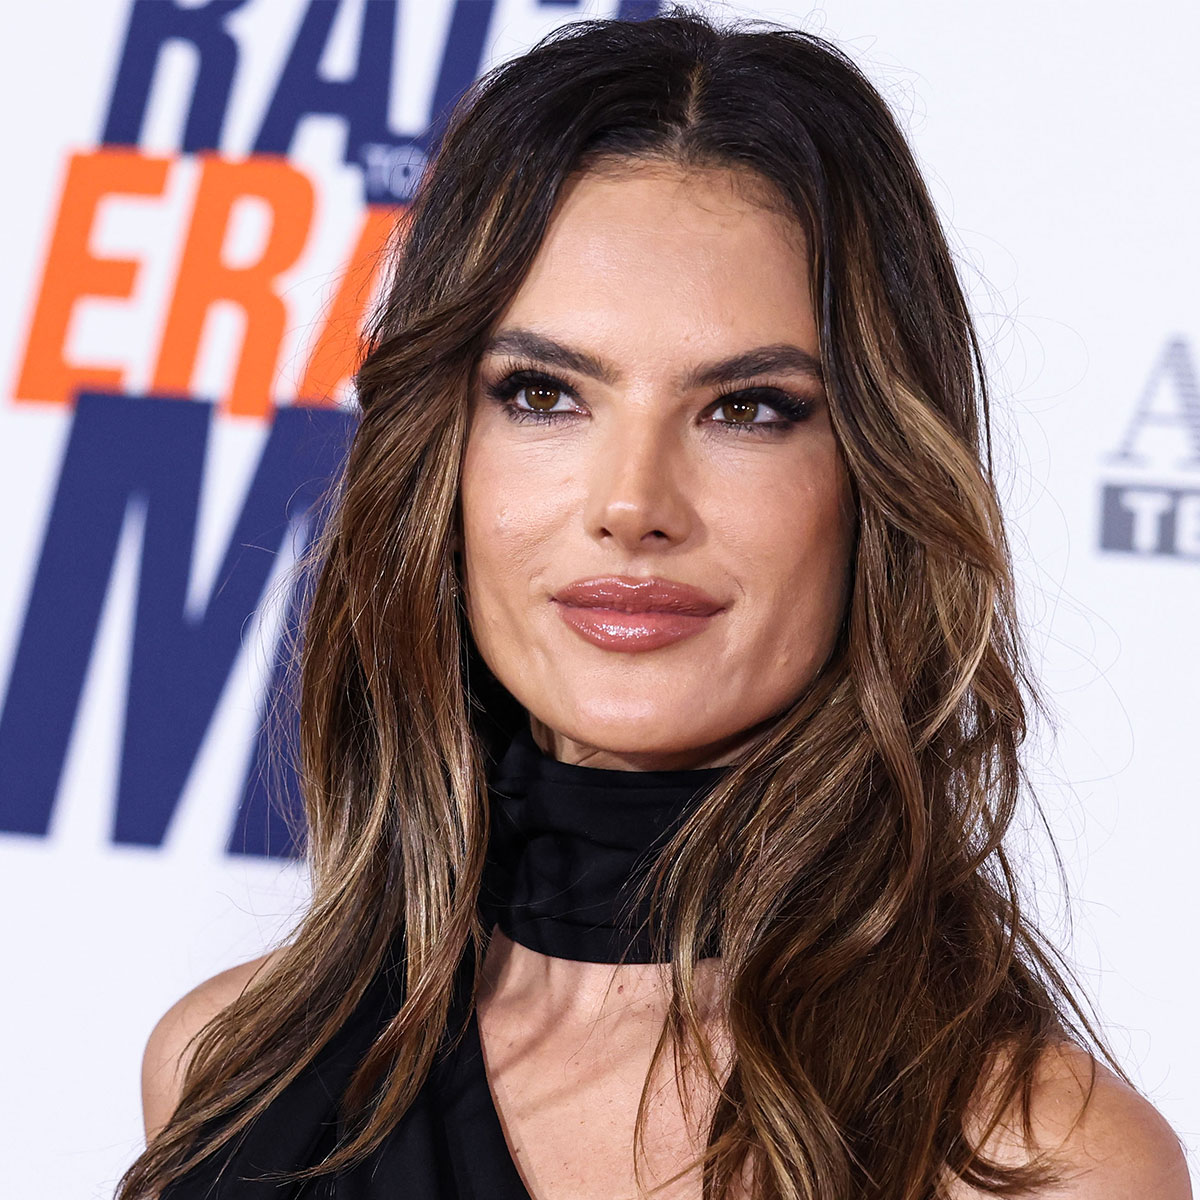 Alessandra Ambrosio Stunned Fans In A Flirty, White Two-Piece Swimsuit  While Vacationing In Ibiza - SHEfinds